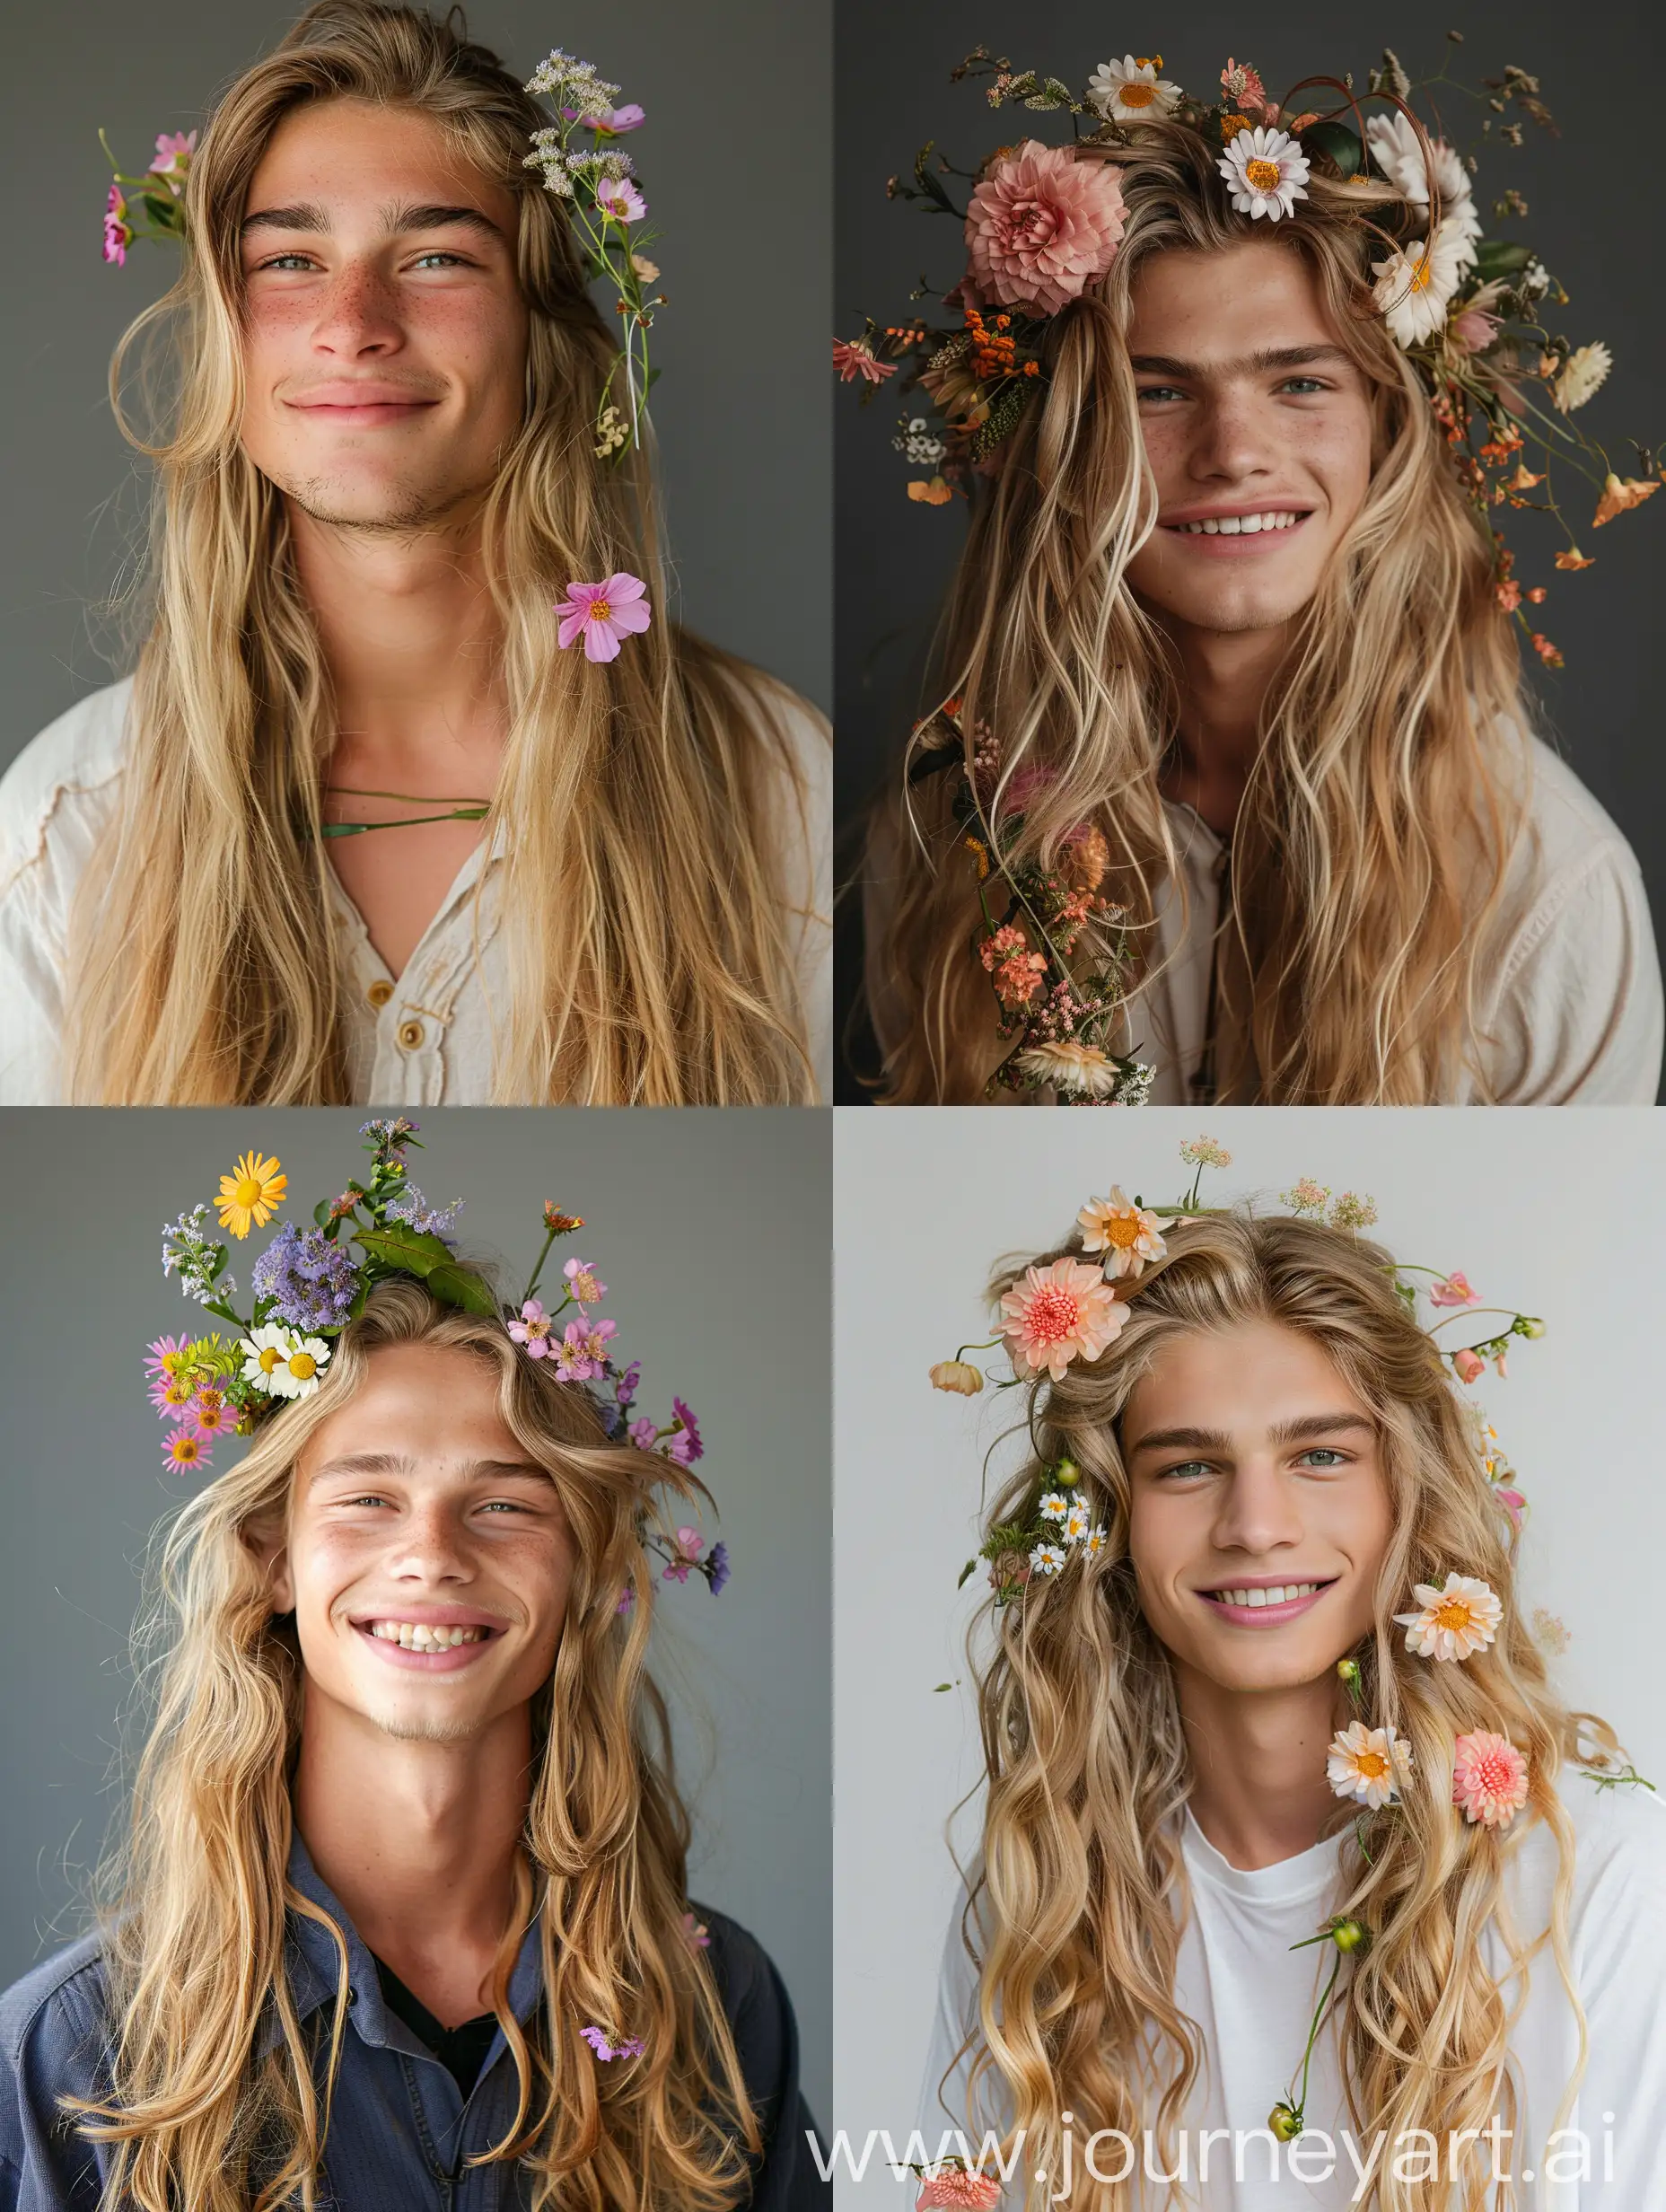 A young man with long blonde hair and flowers in his hair realistic portrait attractive beautiful smiling